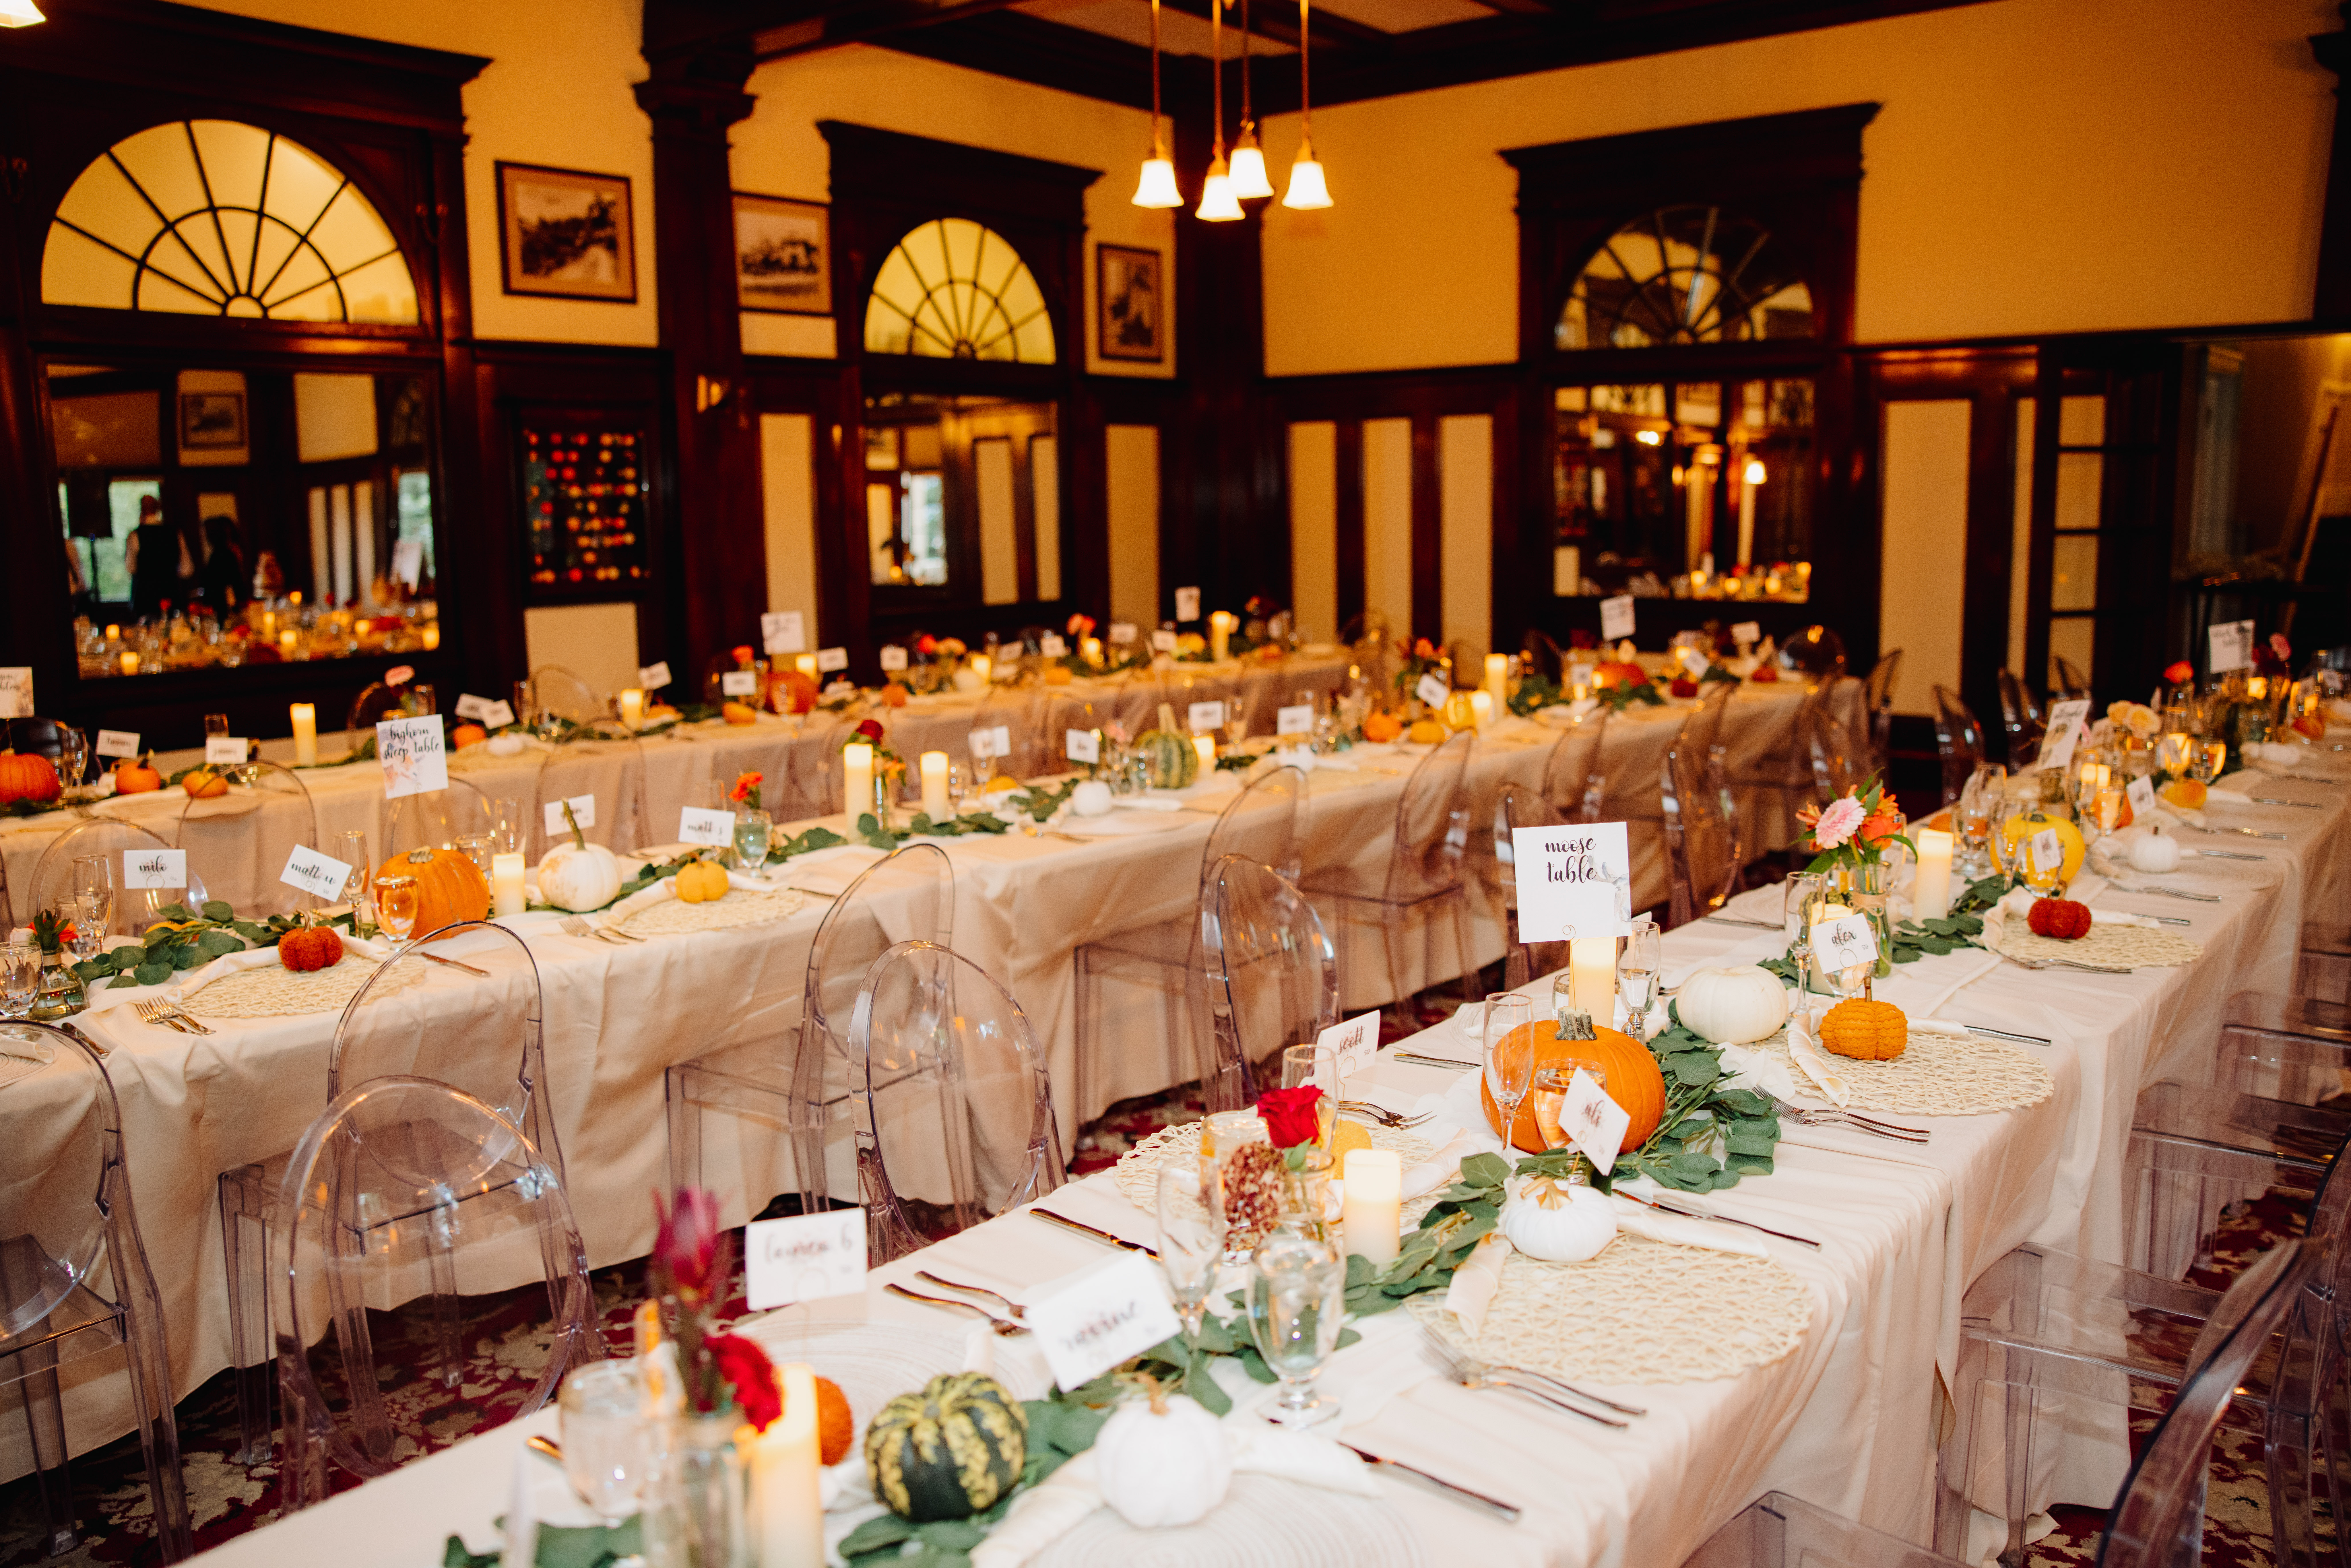 A Rehearsal dinner setup at the famous Stanley Hotel.